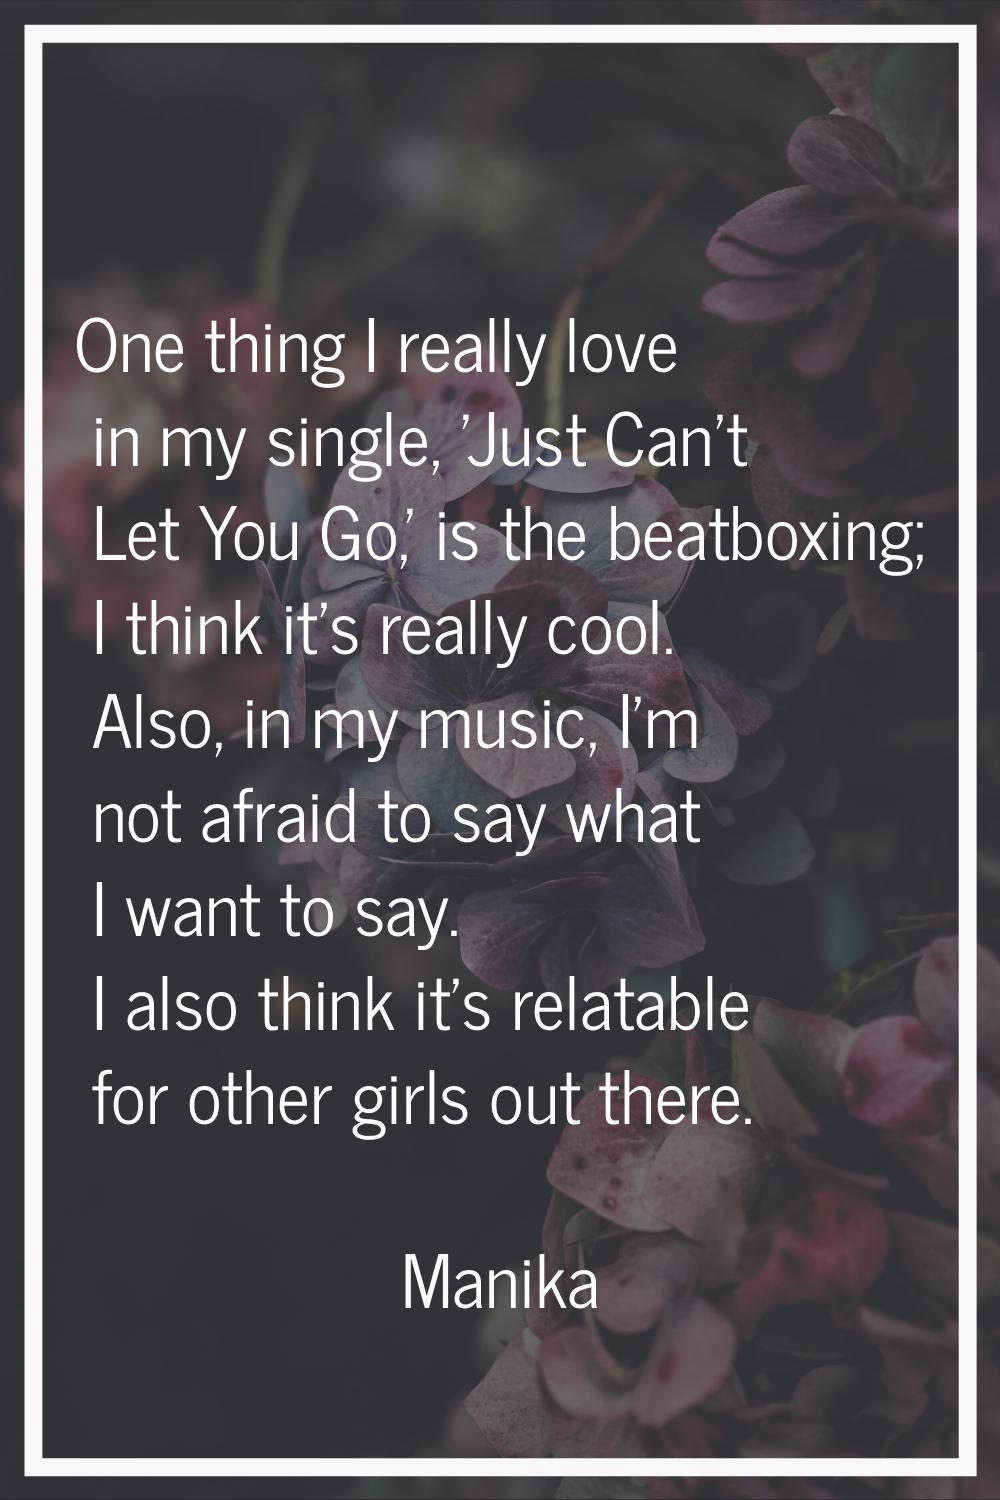 One thing I really love in my single, 'Just Can't Let You Go,' is the beatboxing; I think it's real